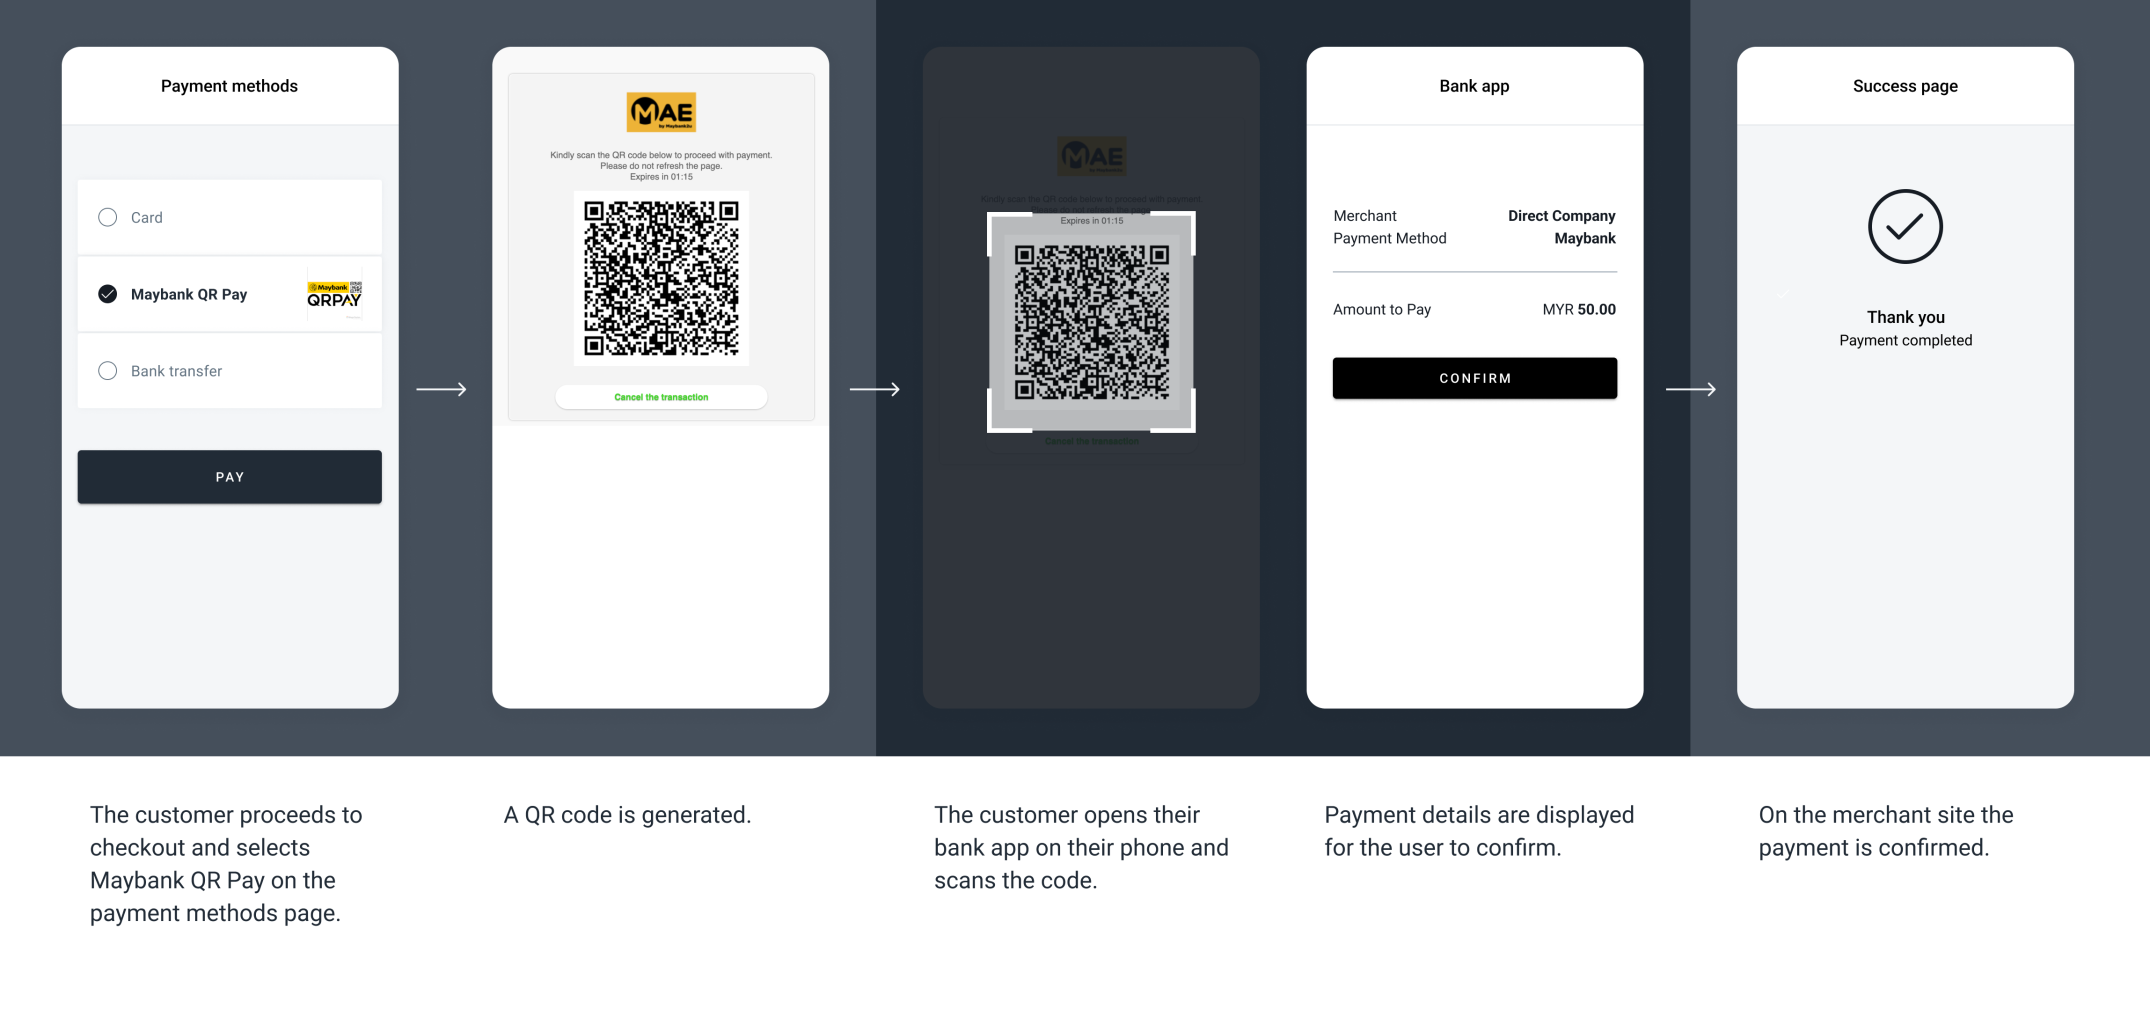 The screenshots illustrate a generic Maybank QR Pay redirect flow through a QR code.